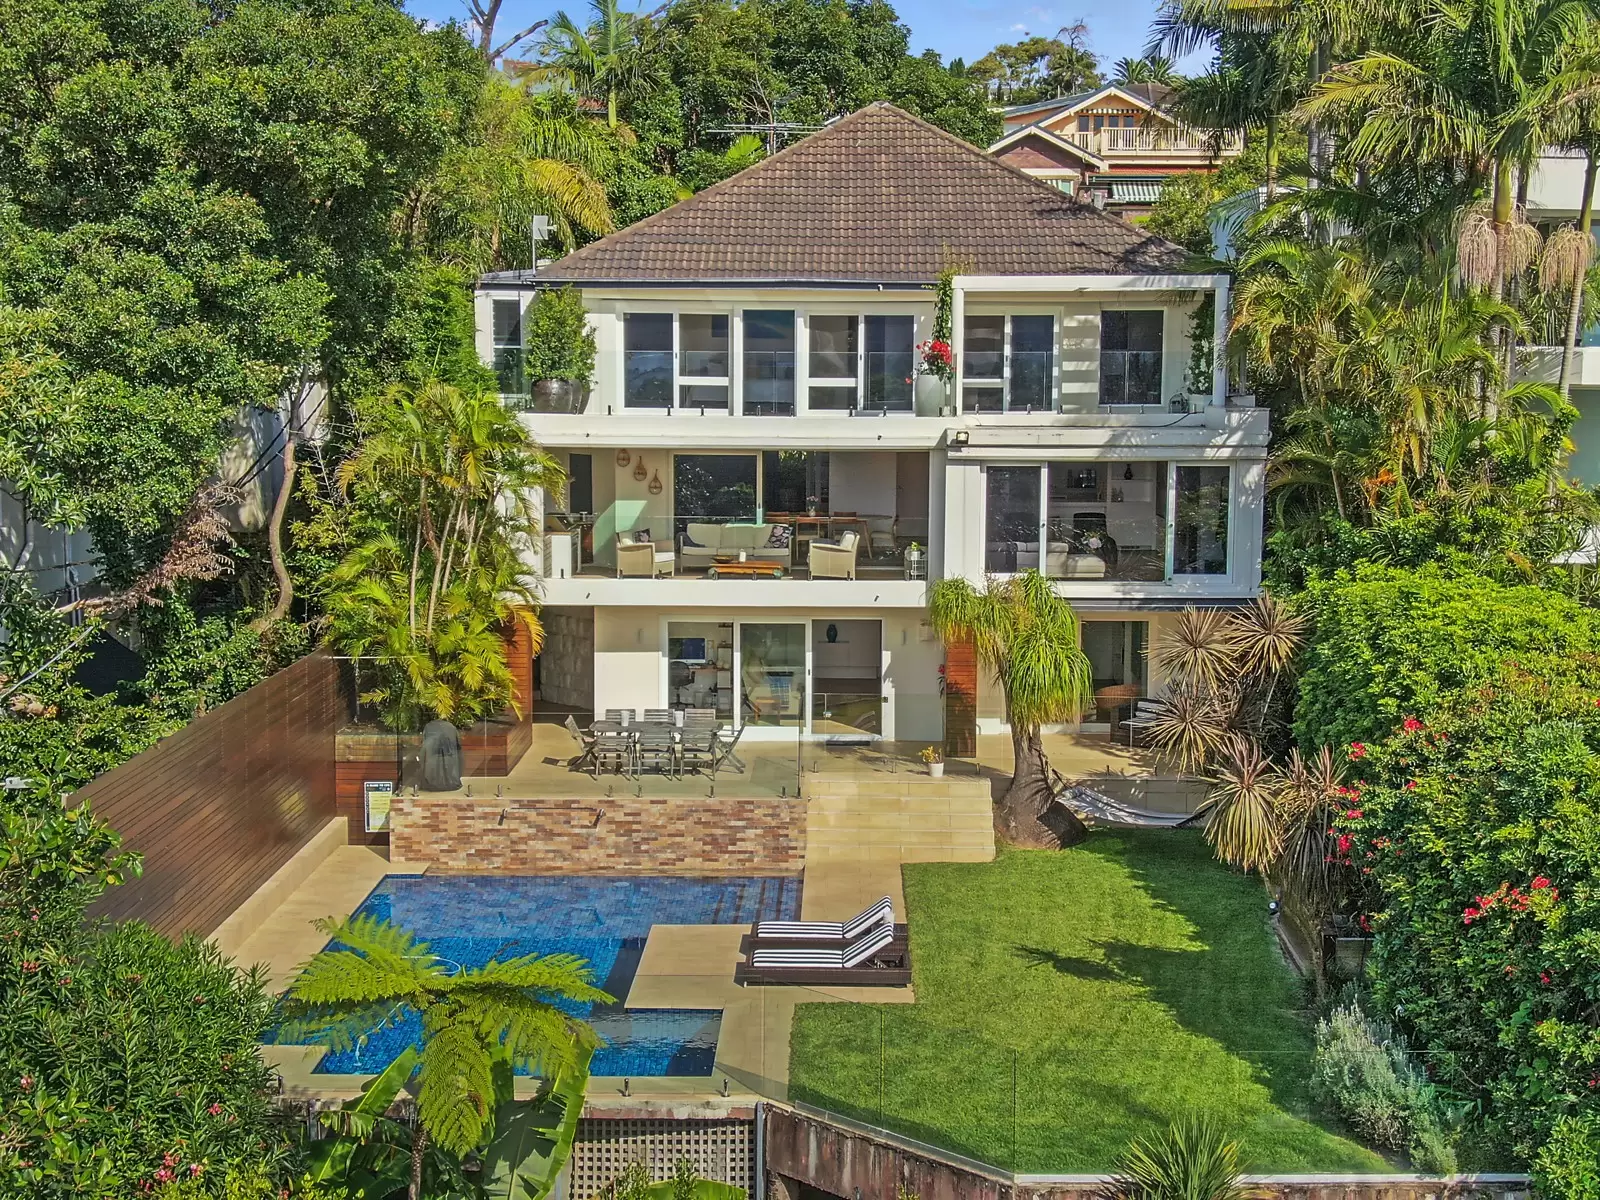 Photo #8: 18 Burrabirra Avenue, Vaucluse - Sold by Sydney Sotheby's International Realty